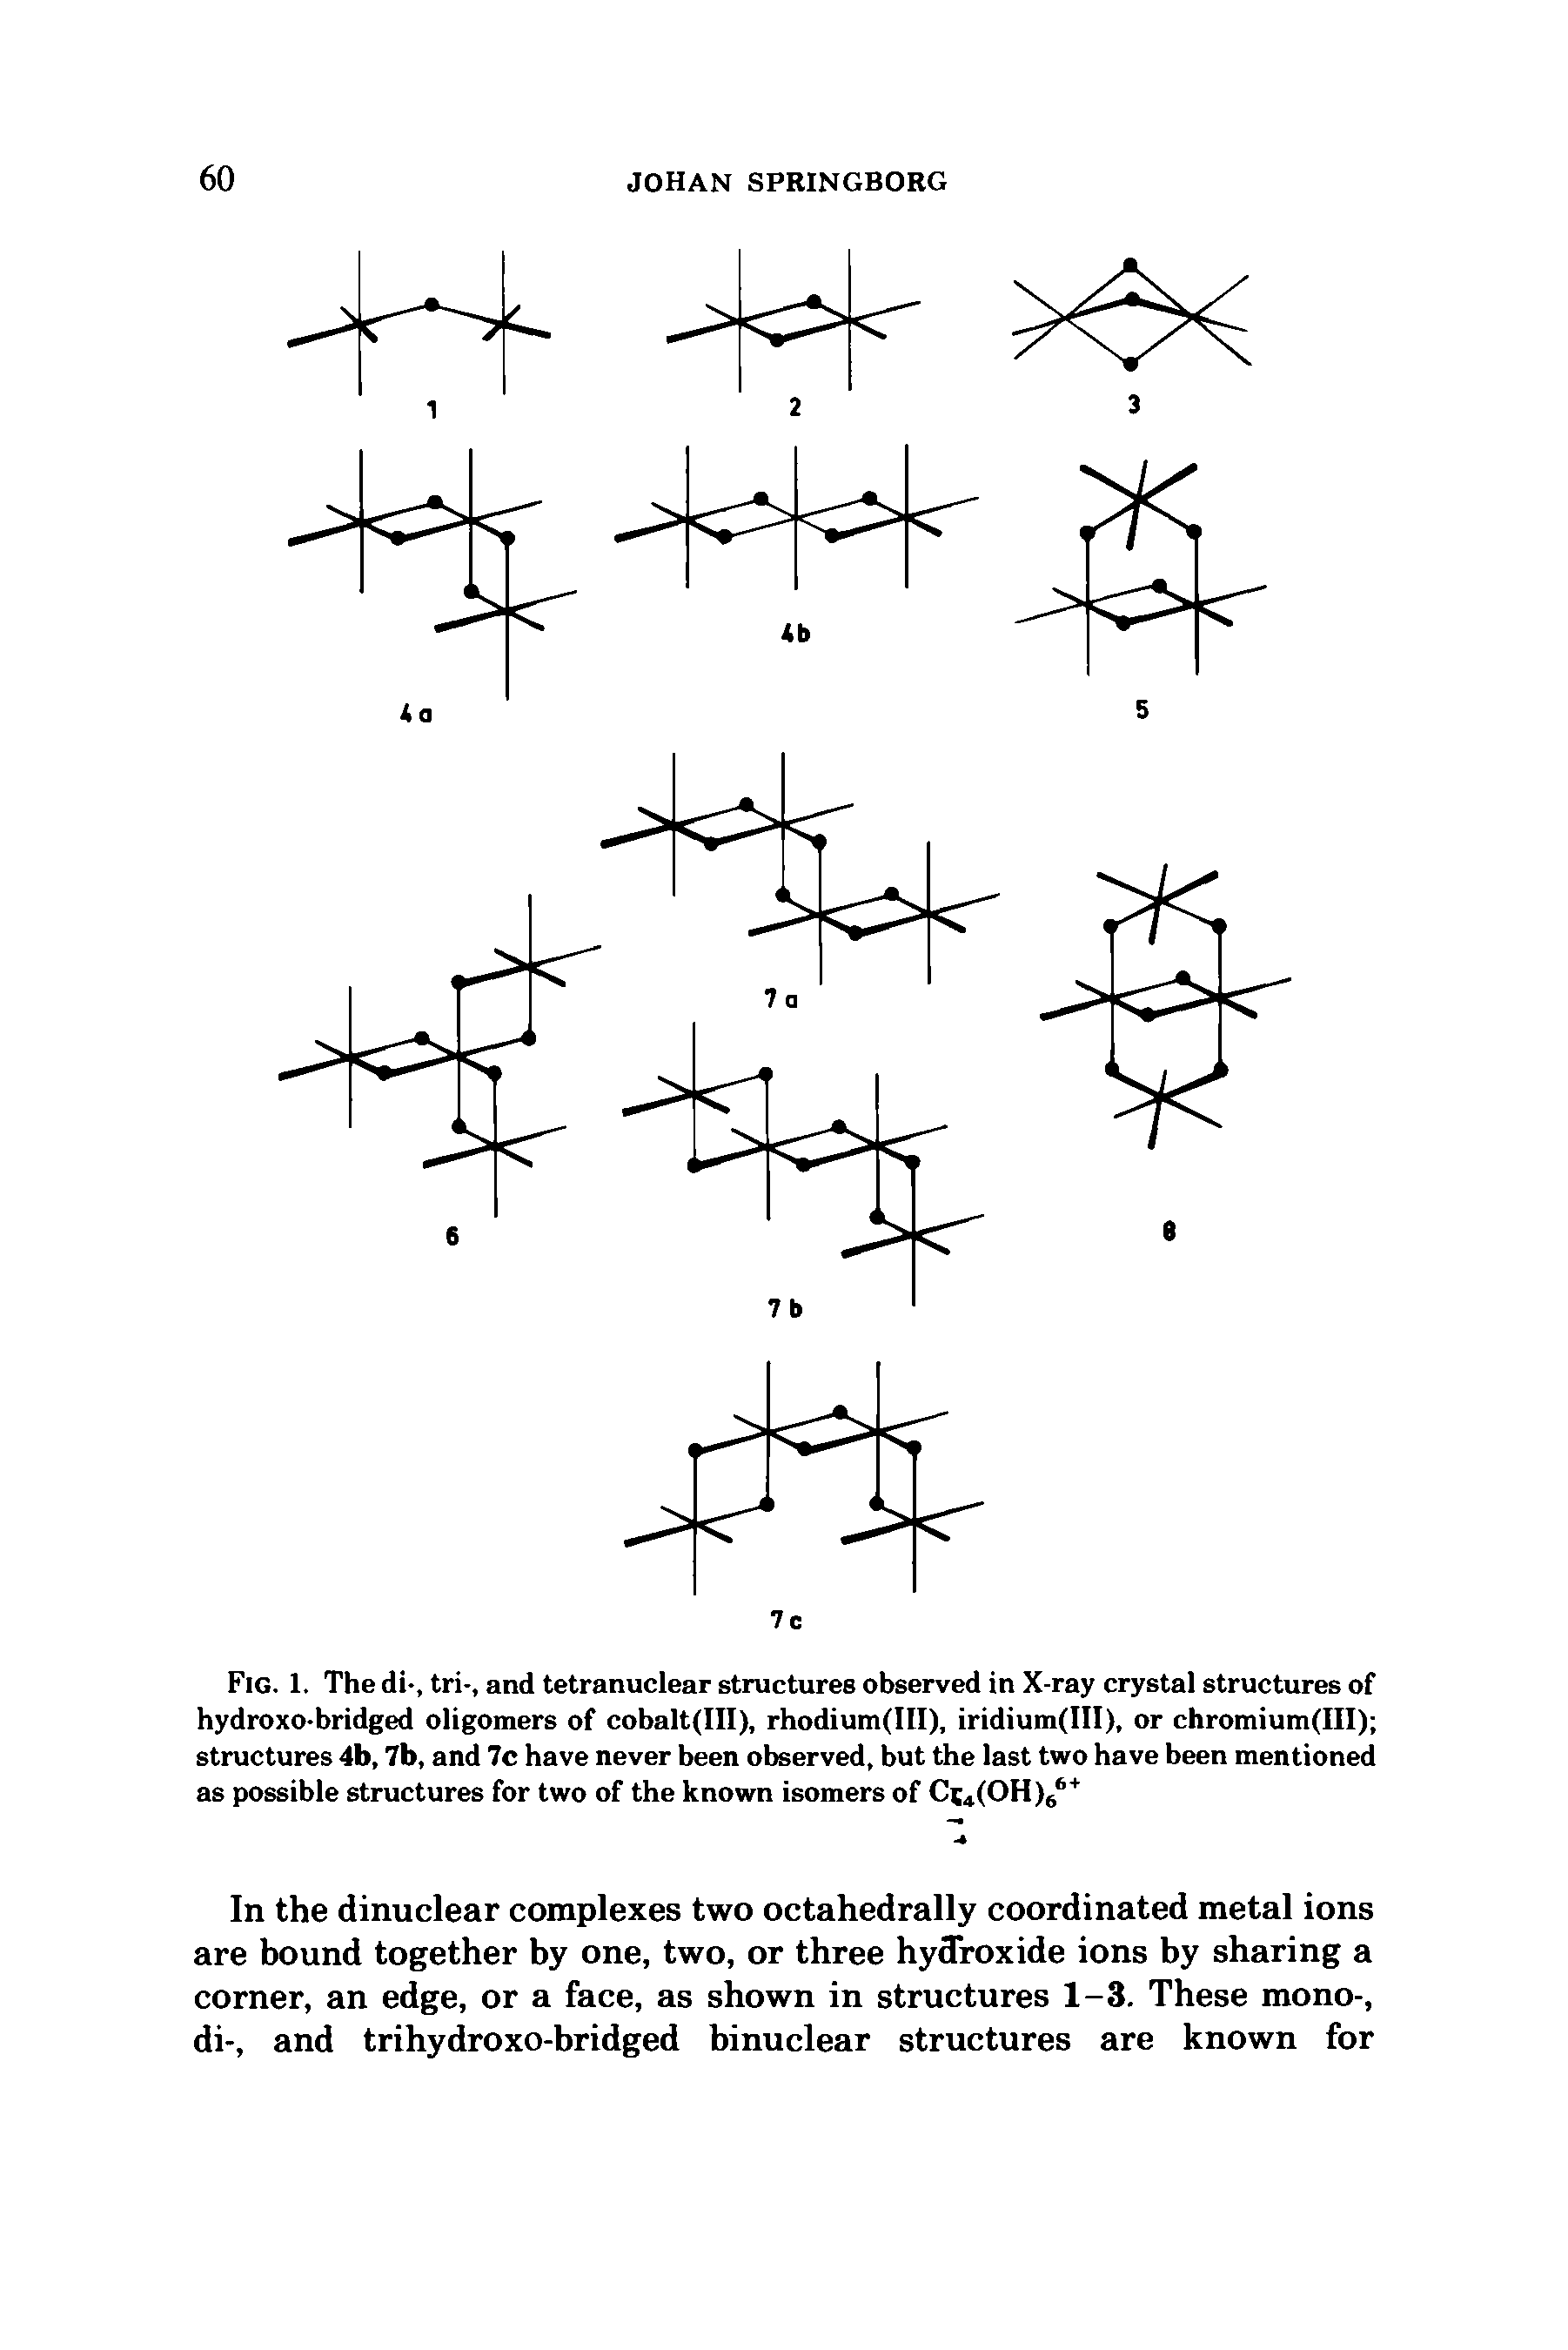 Fig. 1. The di-, tri-, and tetranuclear structures observed in X-ray crystal structures of hydroxo-bridged oligomers of cobalt(III), rhodium(III), iridium(III), or chromium(III) structures 4b, 7b, and 7c have never been observed, but the last two have been mentioned as possible structures for two of the known isomers of Cj4(OH)66+...